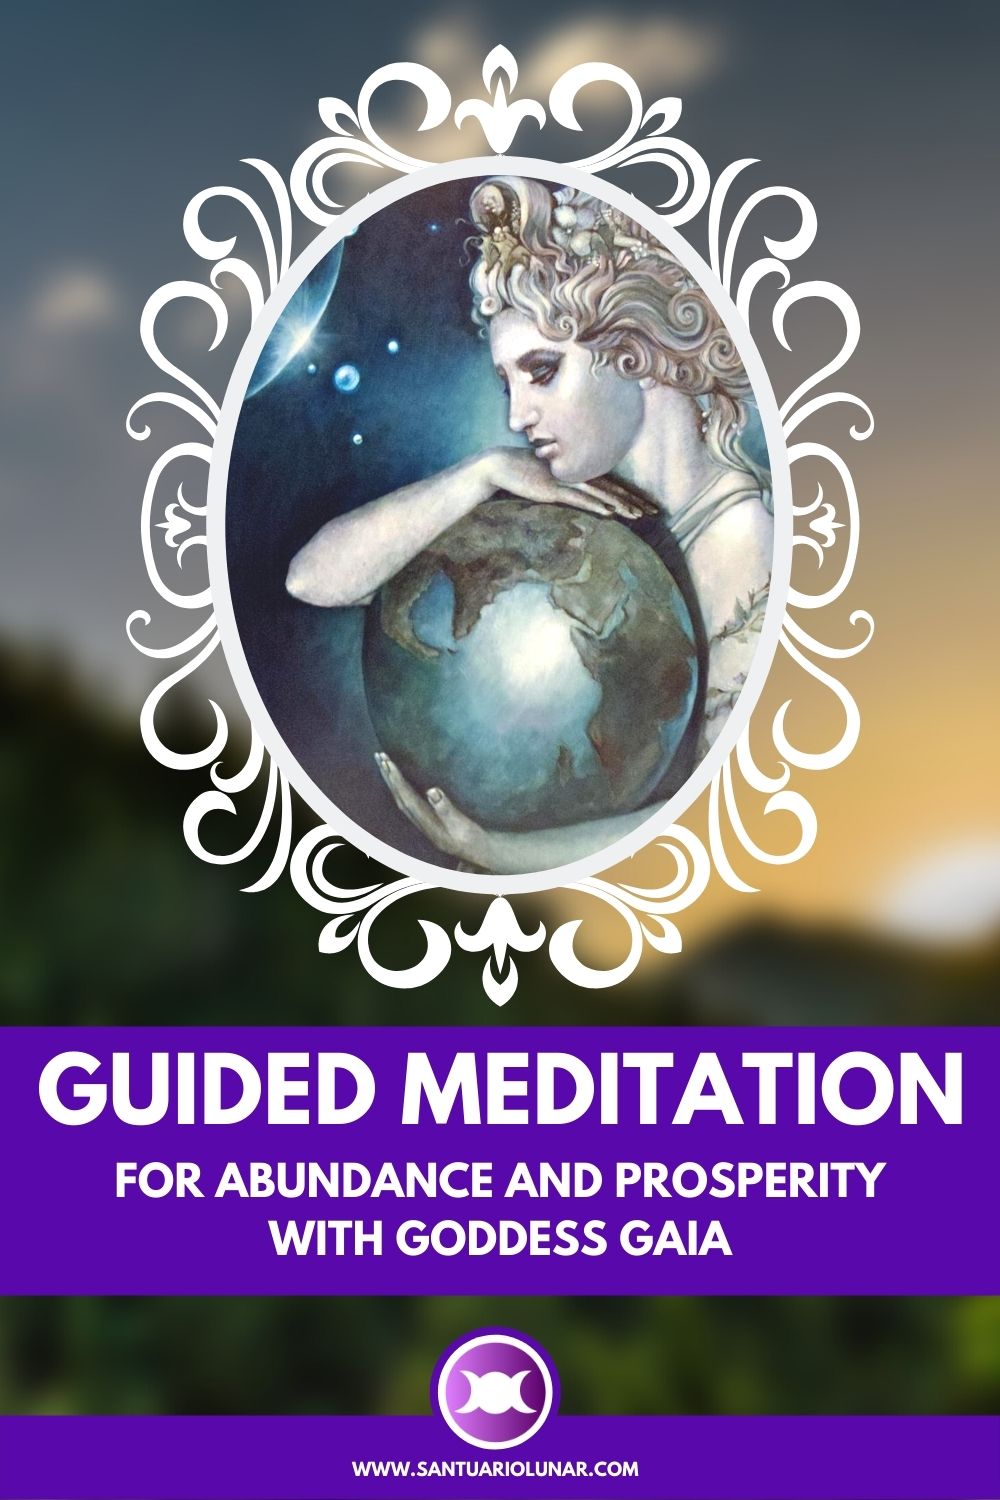 Guided Meditation for Abundance with Gaia (Pinterest)